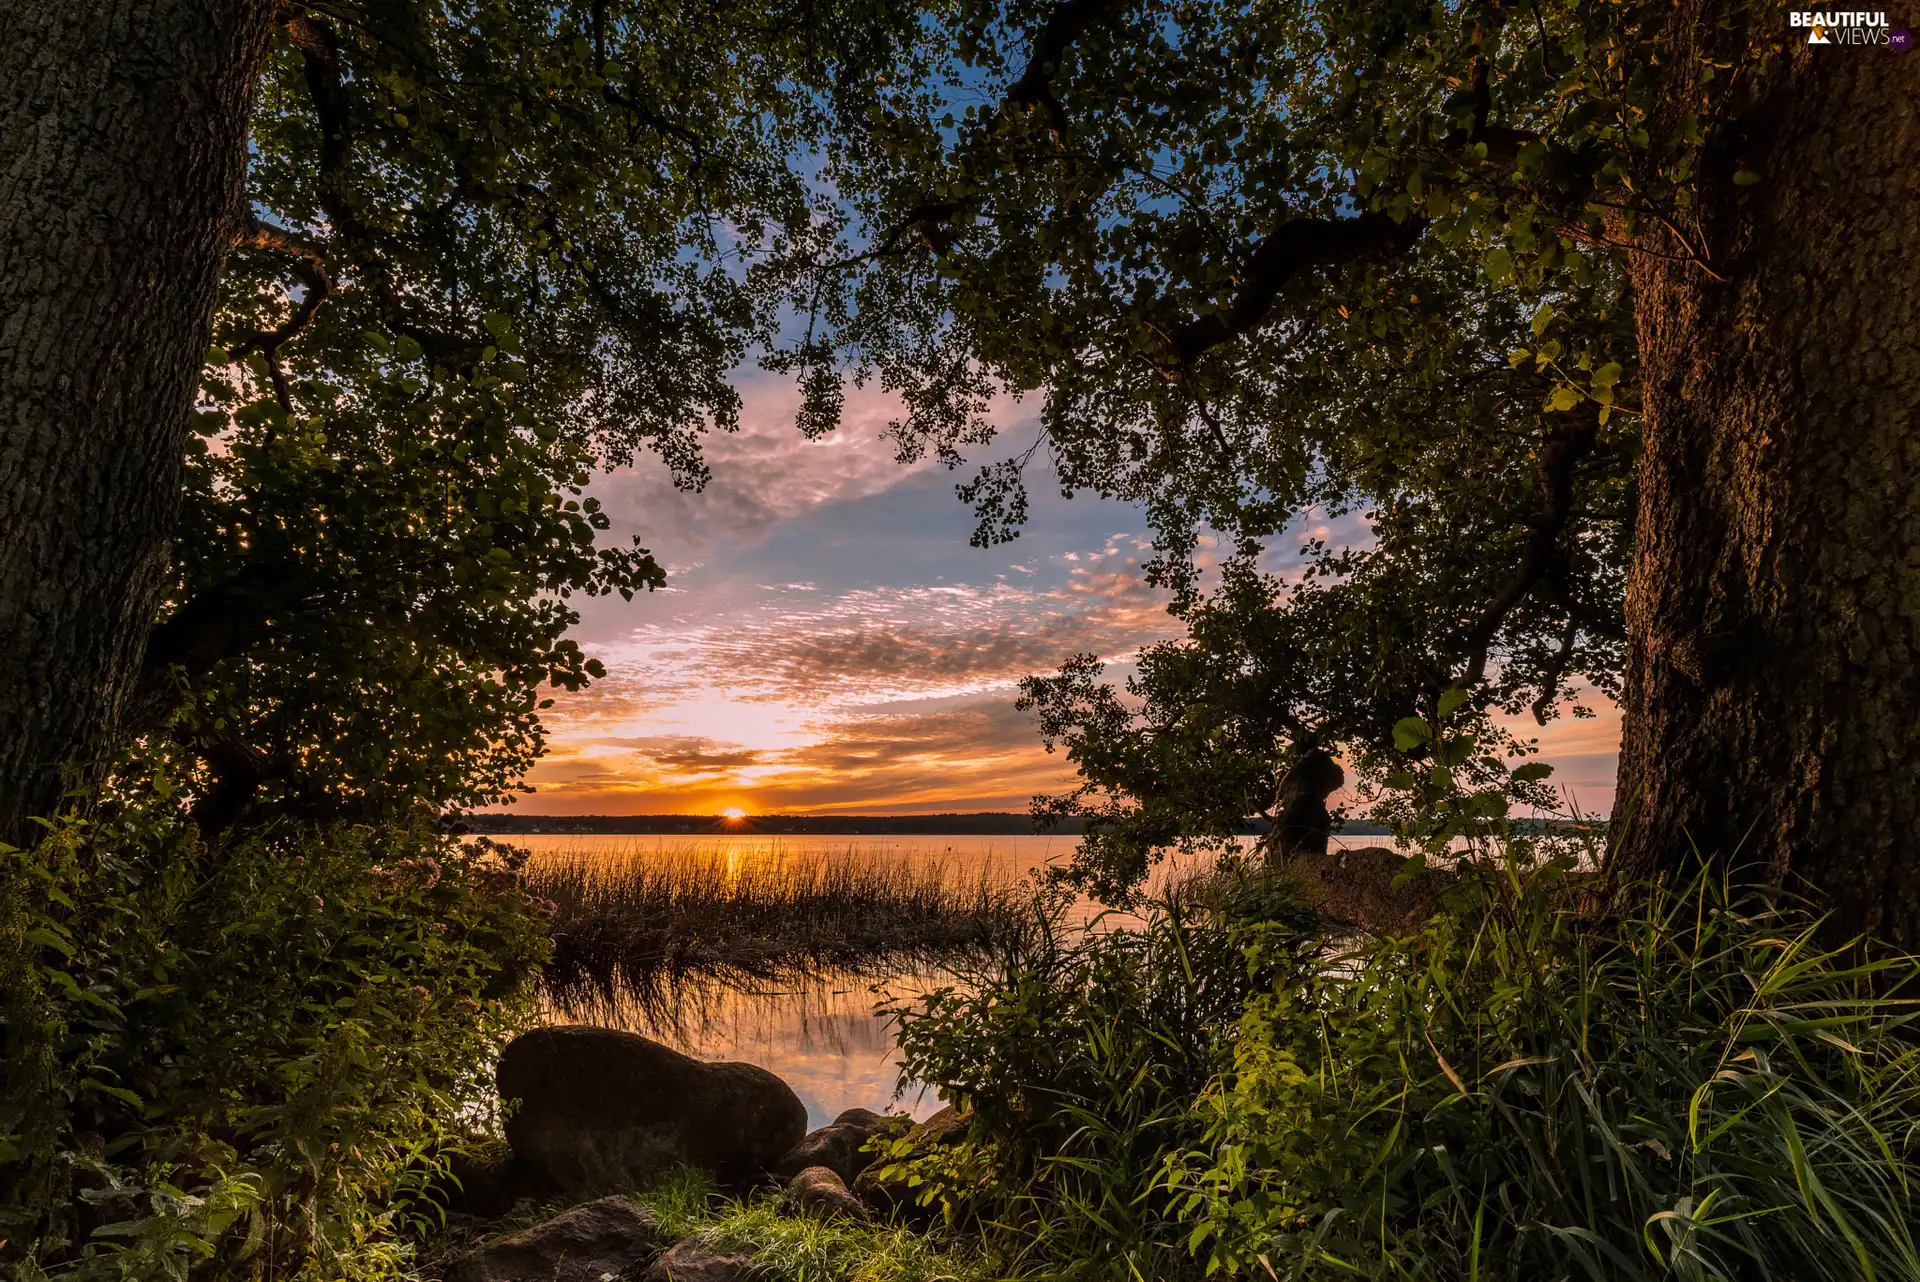 trees, Great Sunsets, VEGETATION, Stones, viewes, lake